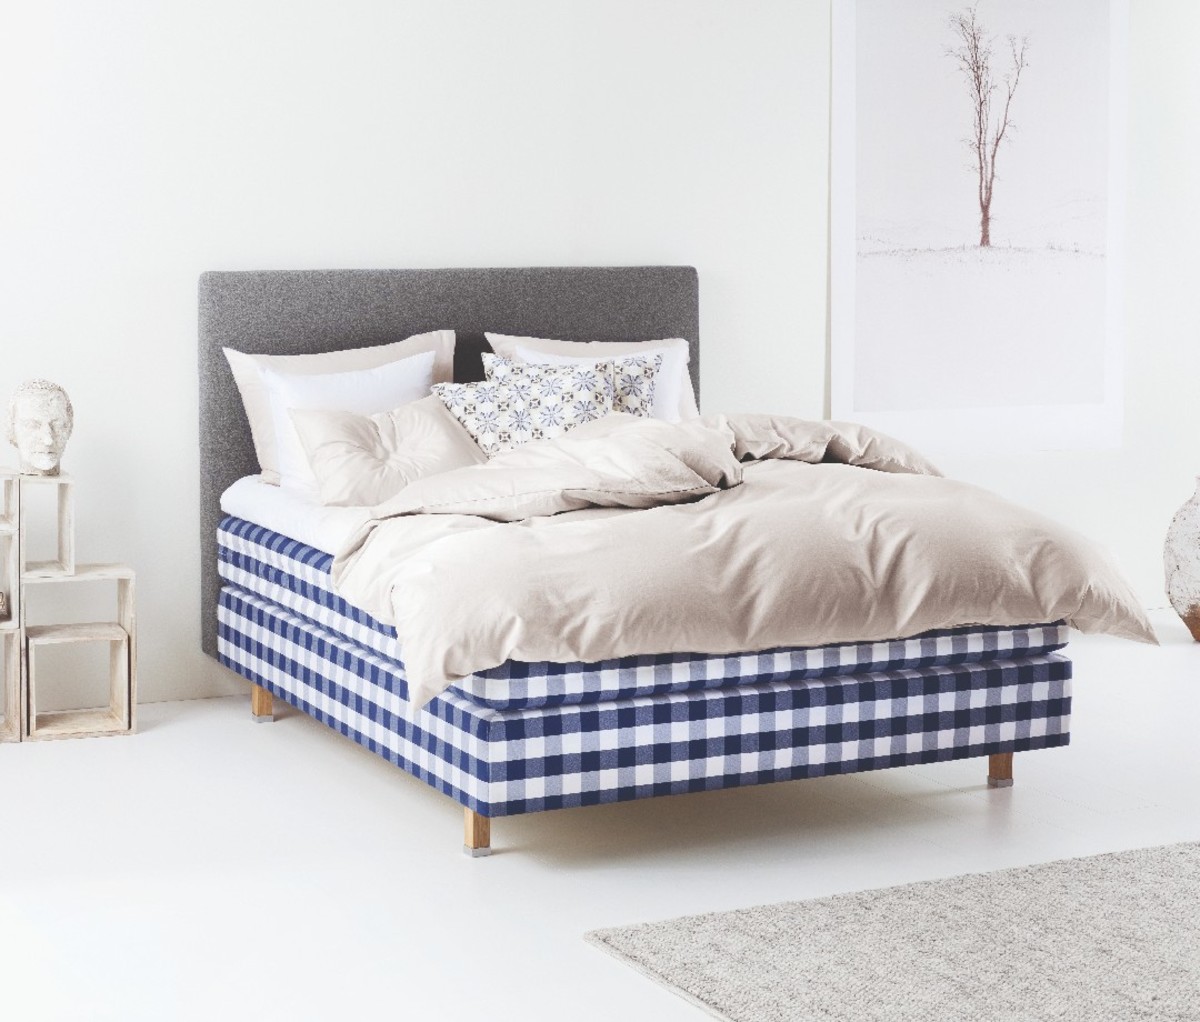 A image of a blue plaid Hästens Herlewing mattress in a bedroom.